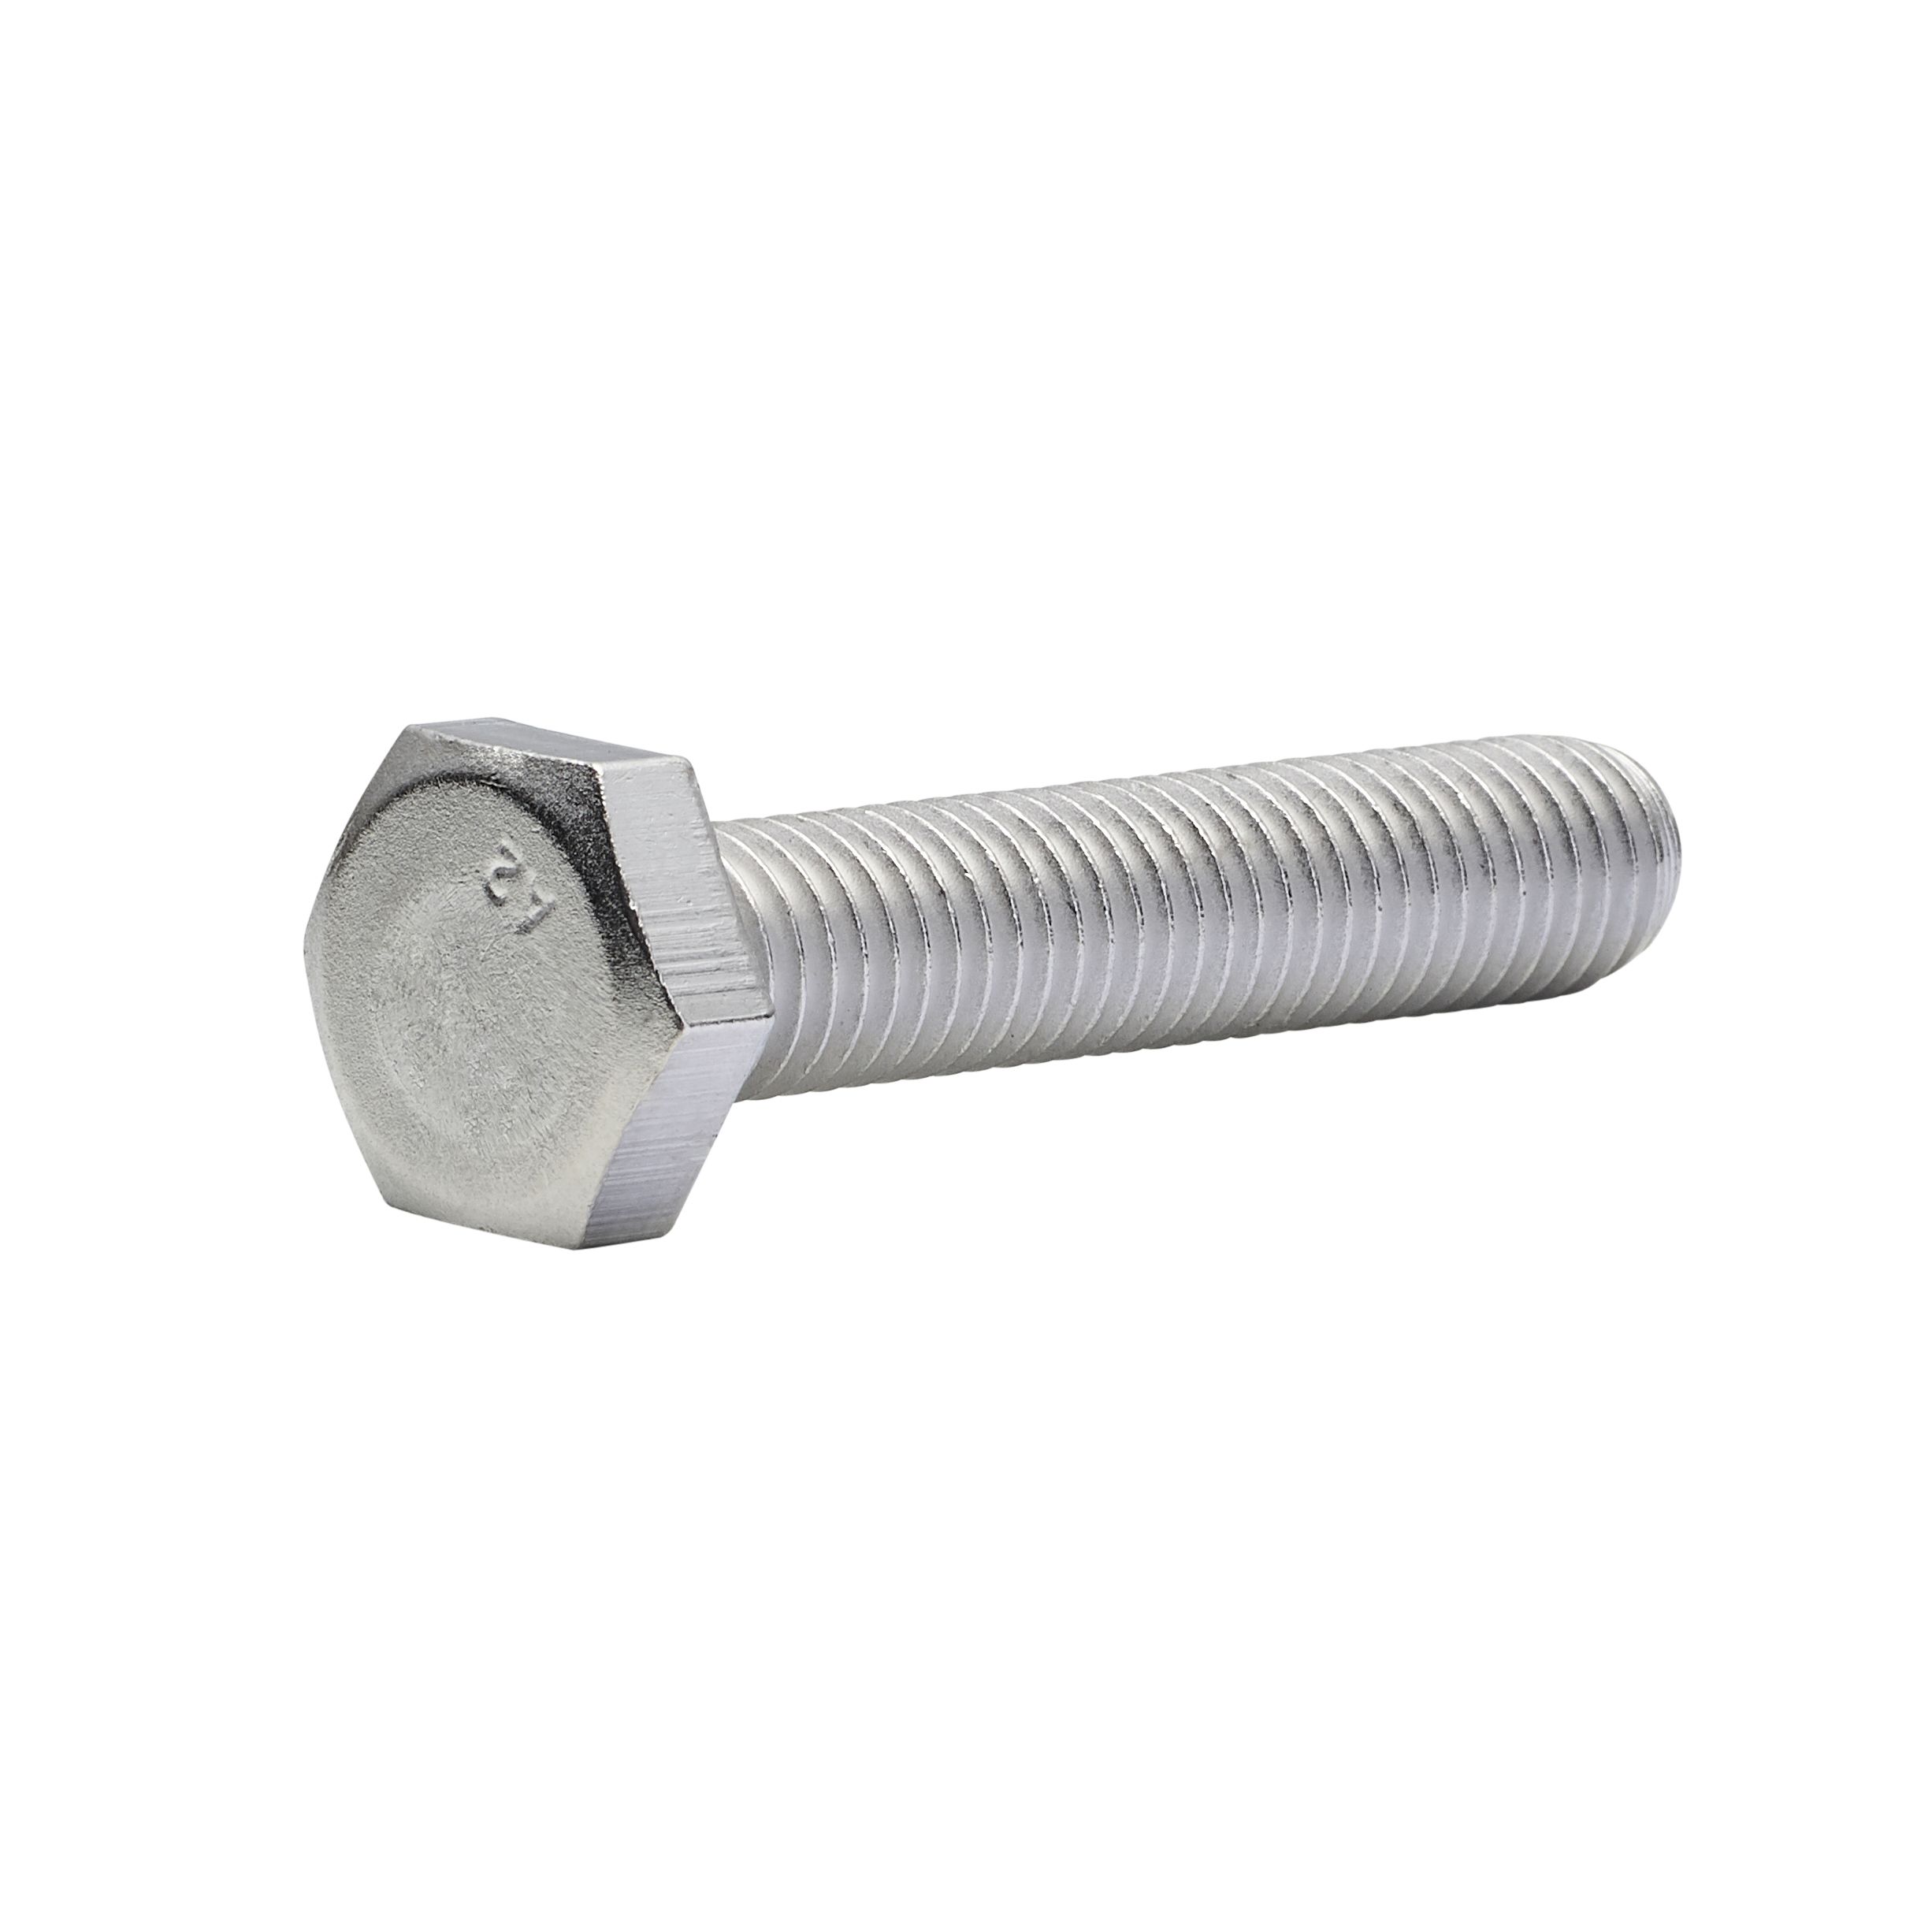 Diall M10 Hex A2 stainless steel Bolt & nut (L)50mm (Dia)10mm